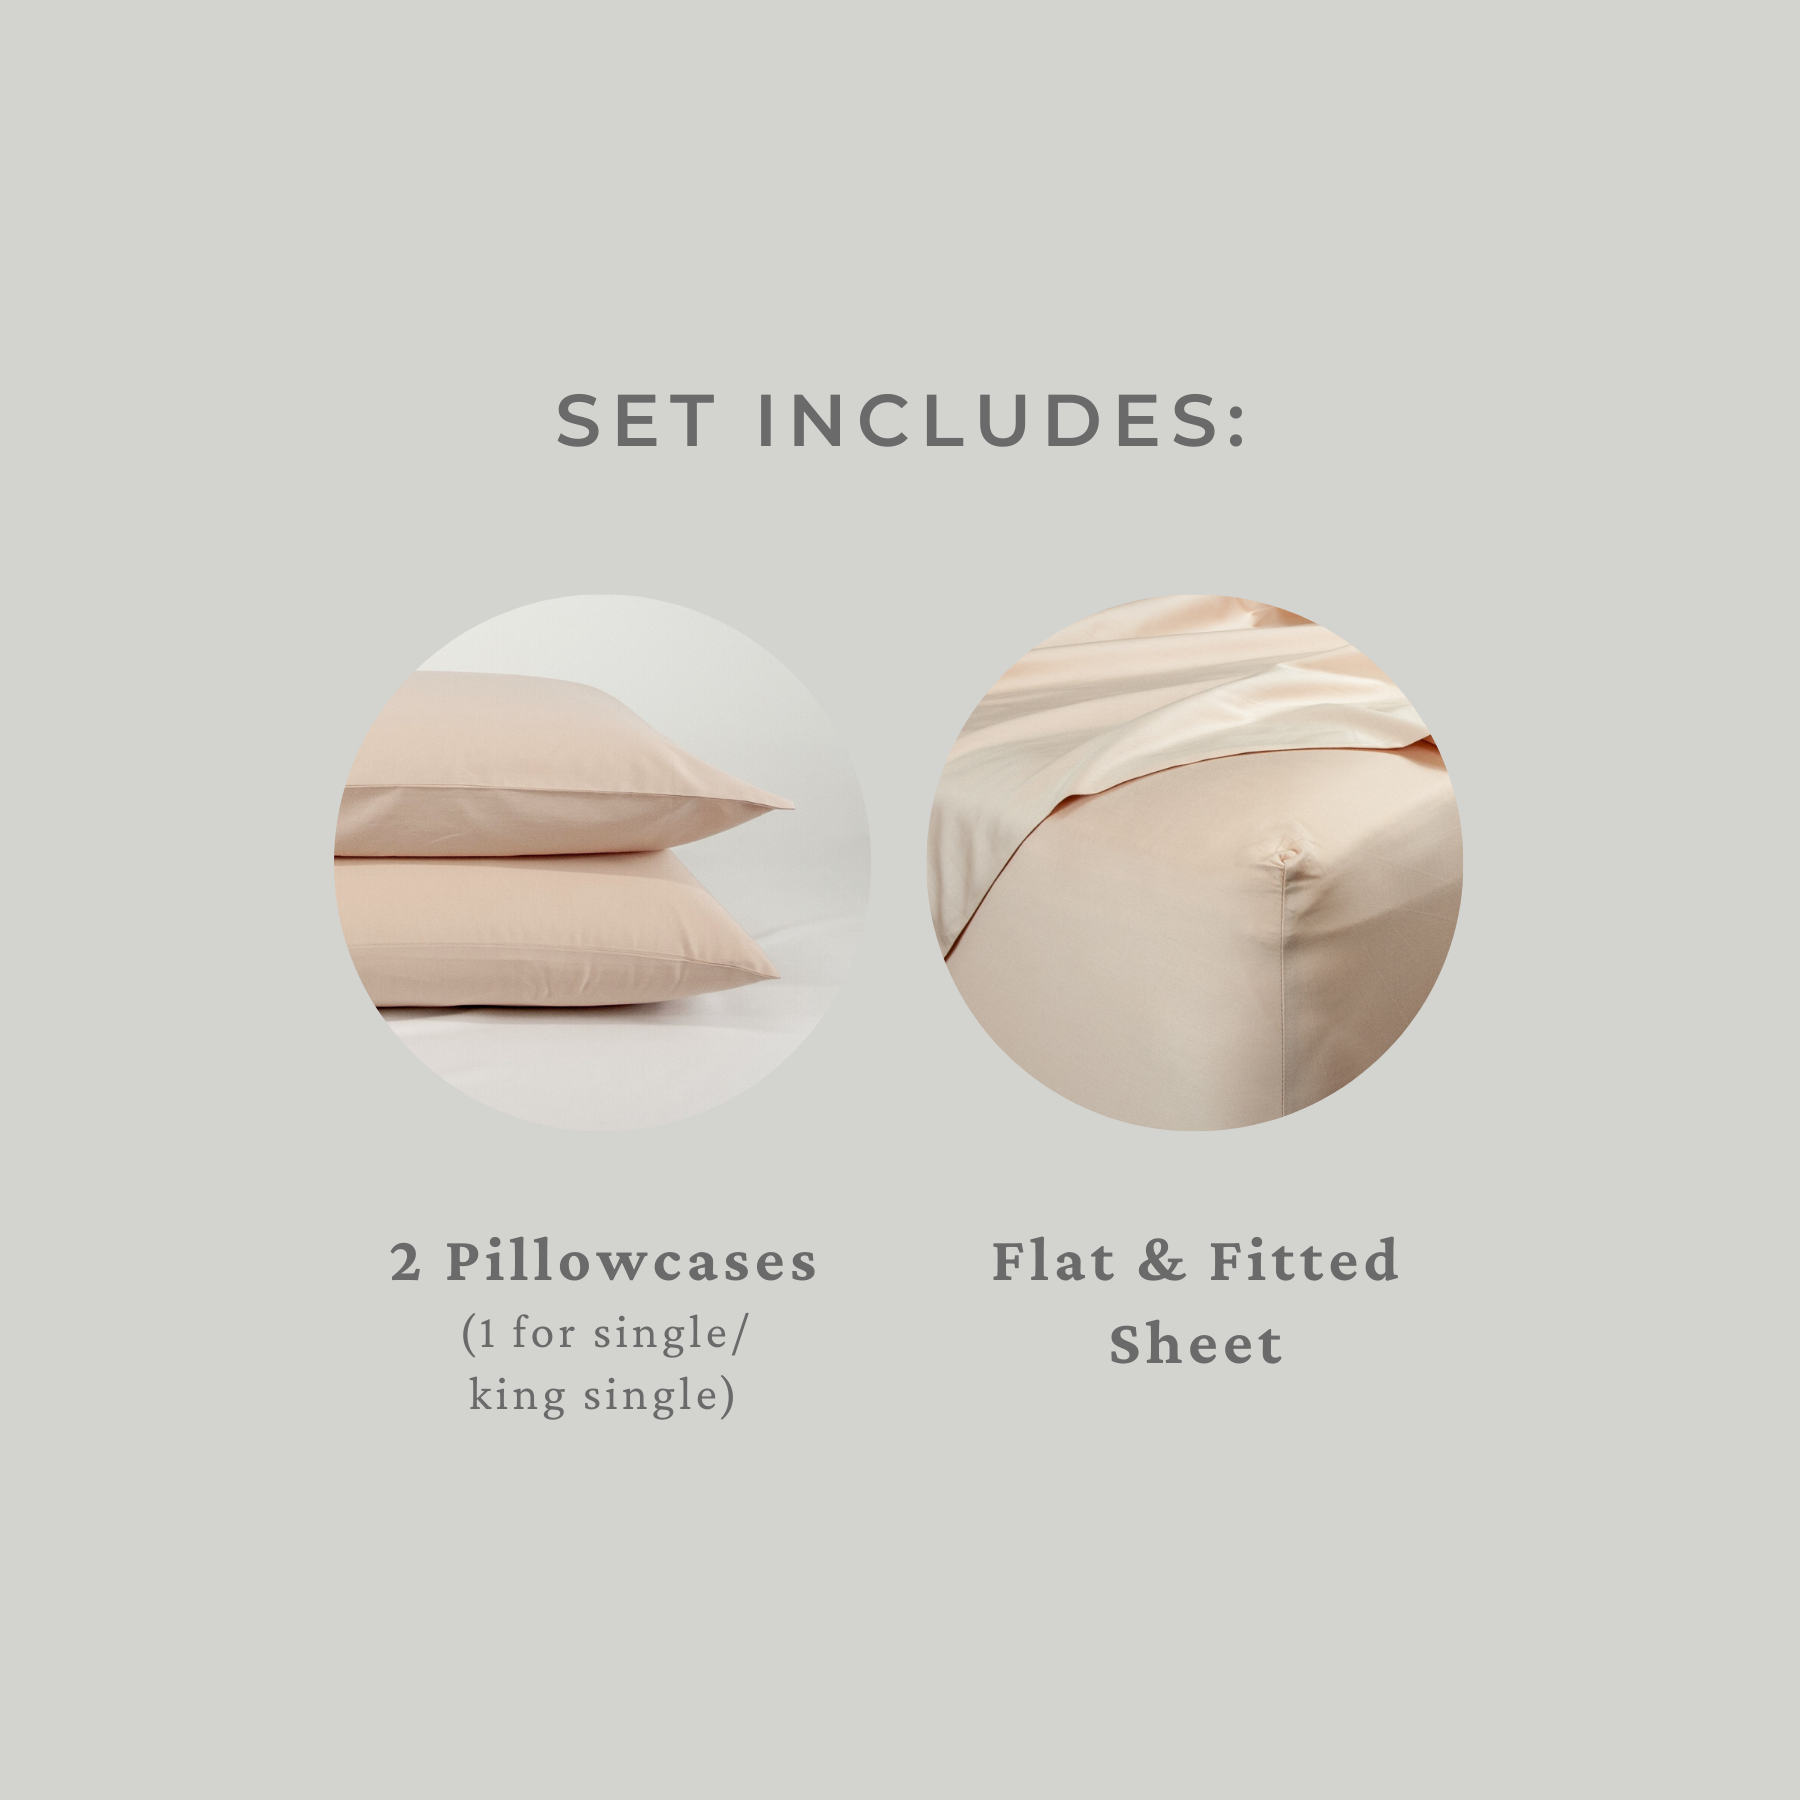 Set includes: flat and fitted sheet, two pillowcases (1 for single or king single)